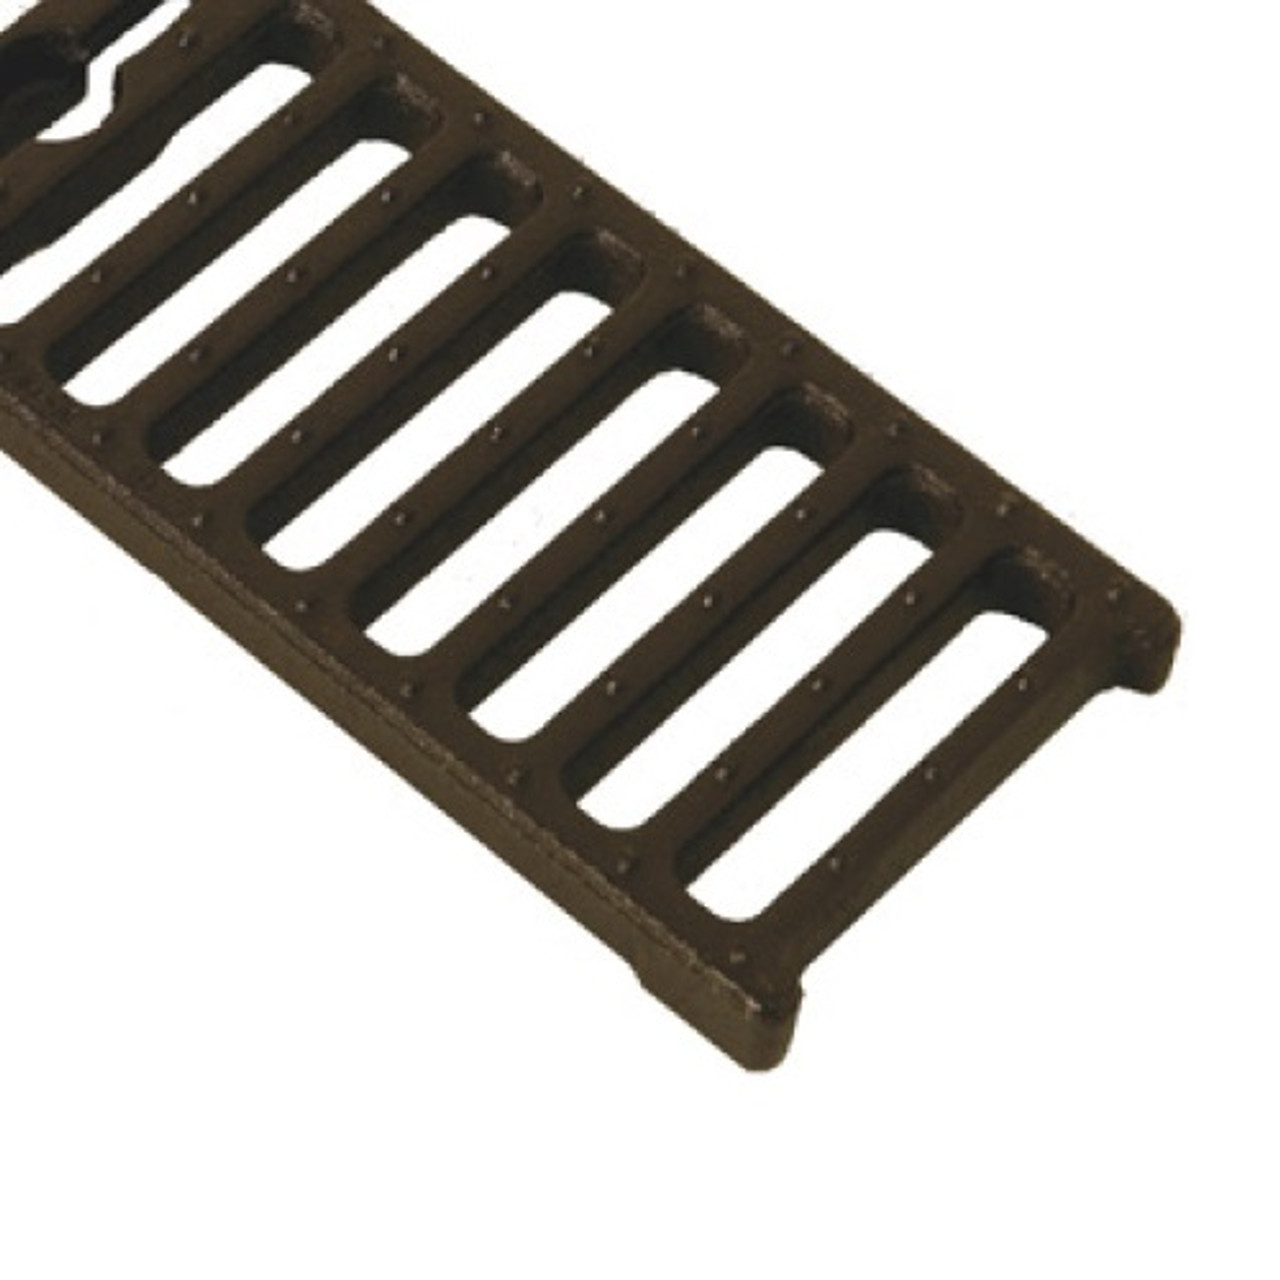 ABT-2504 ABT Polydrain Ductile Iron Slotted Grate 1/2 Meter